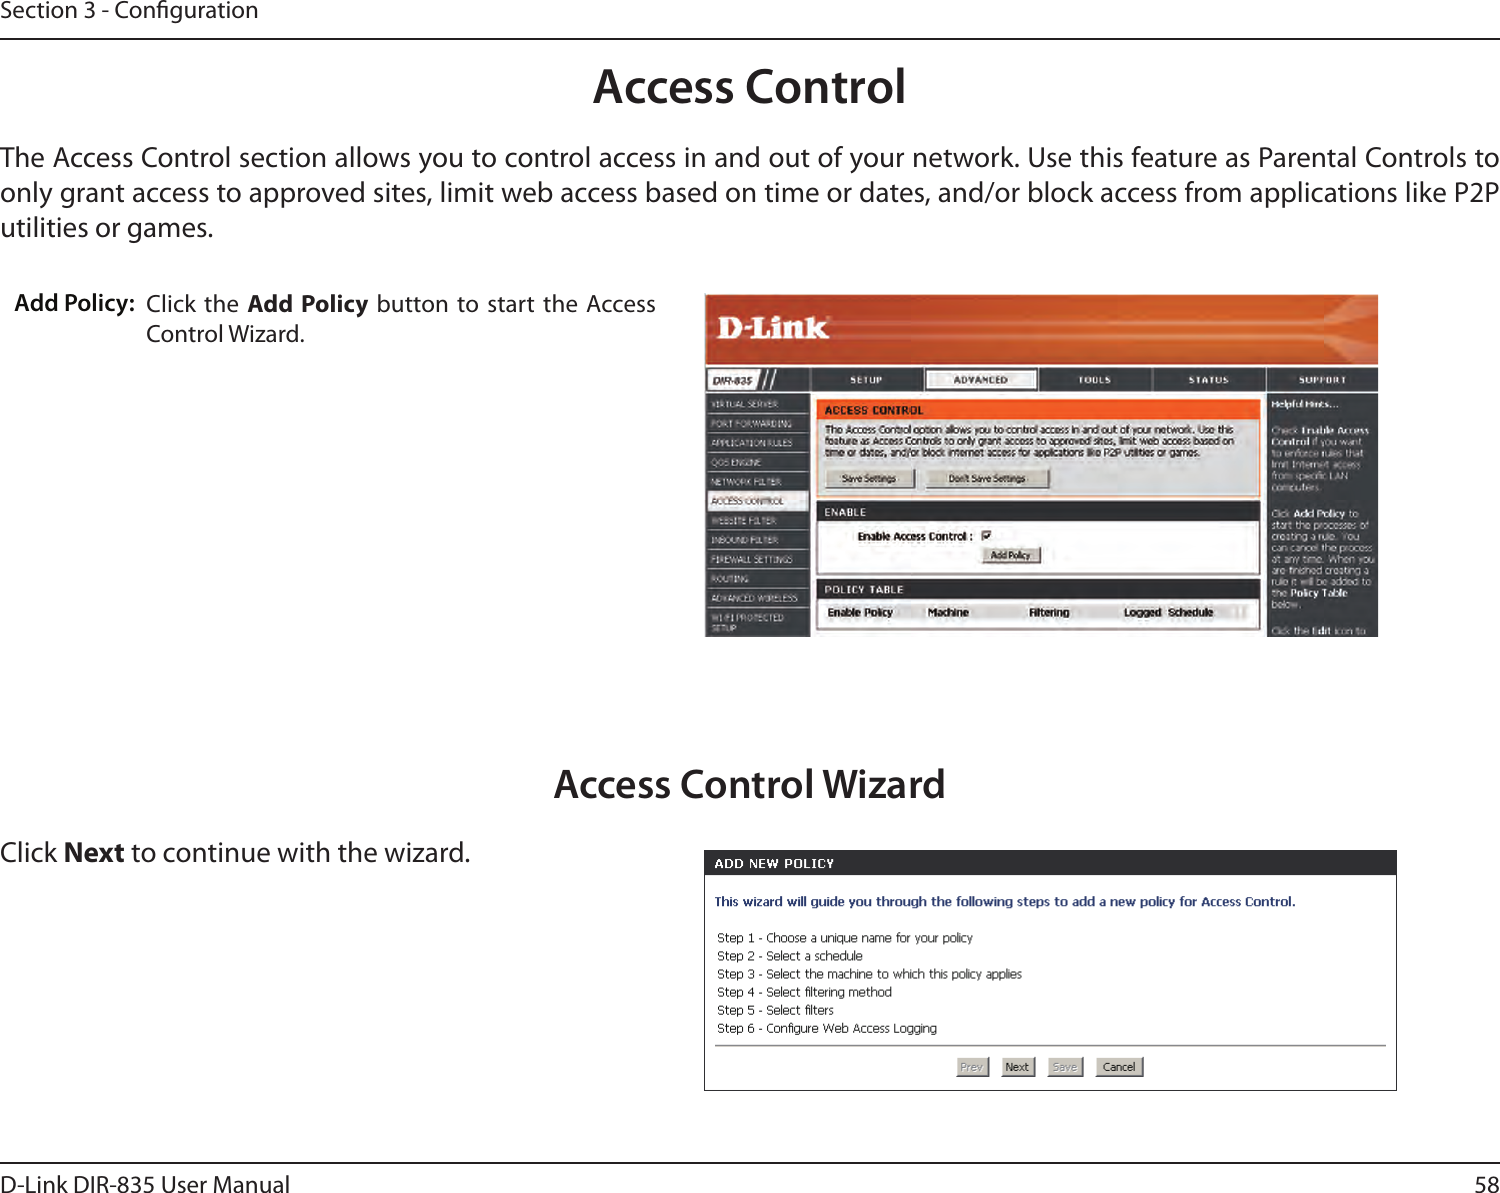 58D-Link DIR-835 User ManualSection 3 - CongurationAccess ControlClick the  Add Policy button  to start the Access Control Wizard. Add Policy:The Access Control section allows you to control access in and out of your network. Use this feature as Parental Controls to only grant access to approved sites, limit web access based on time or dates, and/or block access from applications like P2P utilities or games.Click Next to continue with the wizard.Access Control Wizard